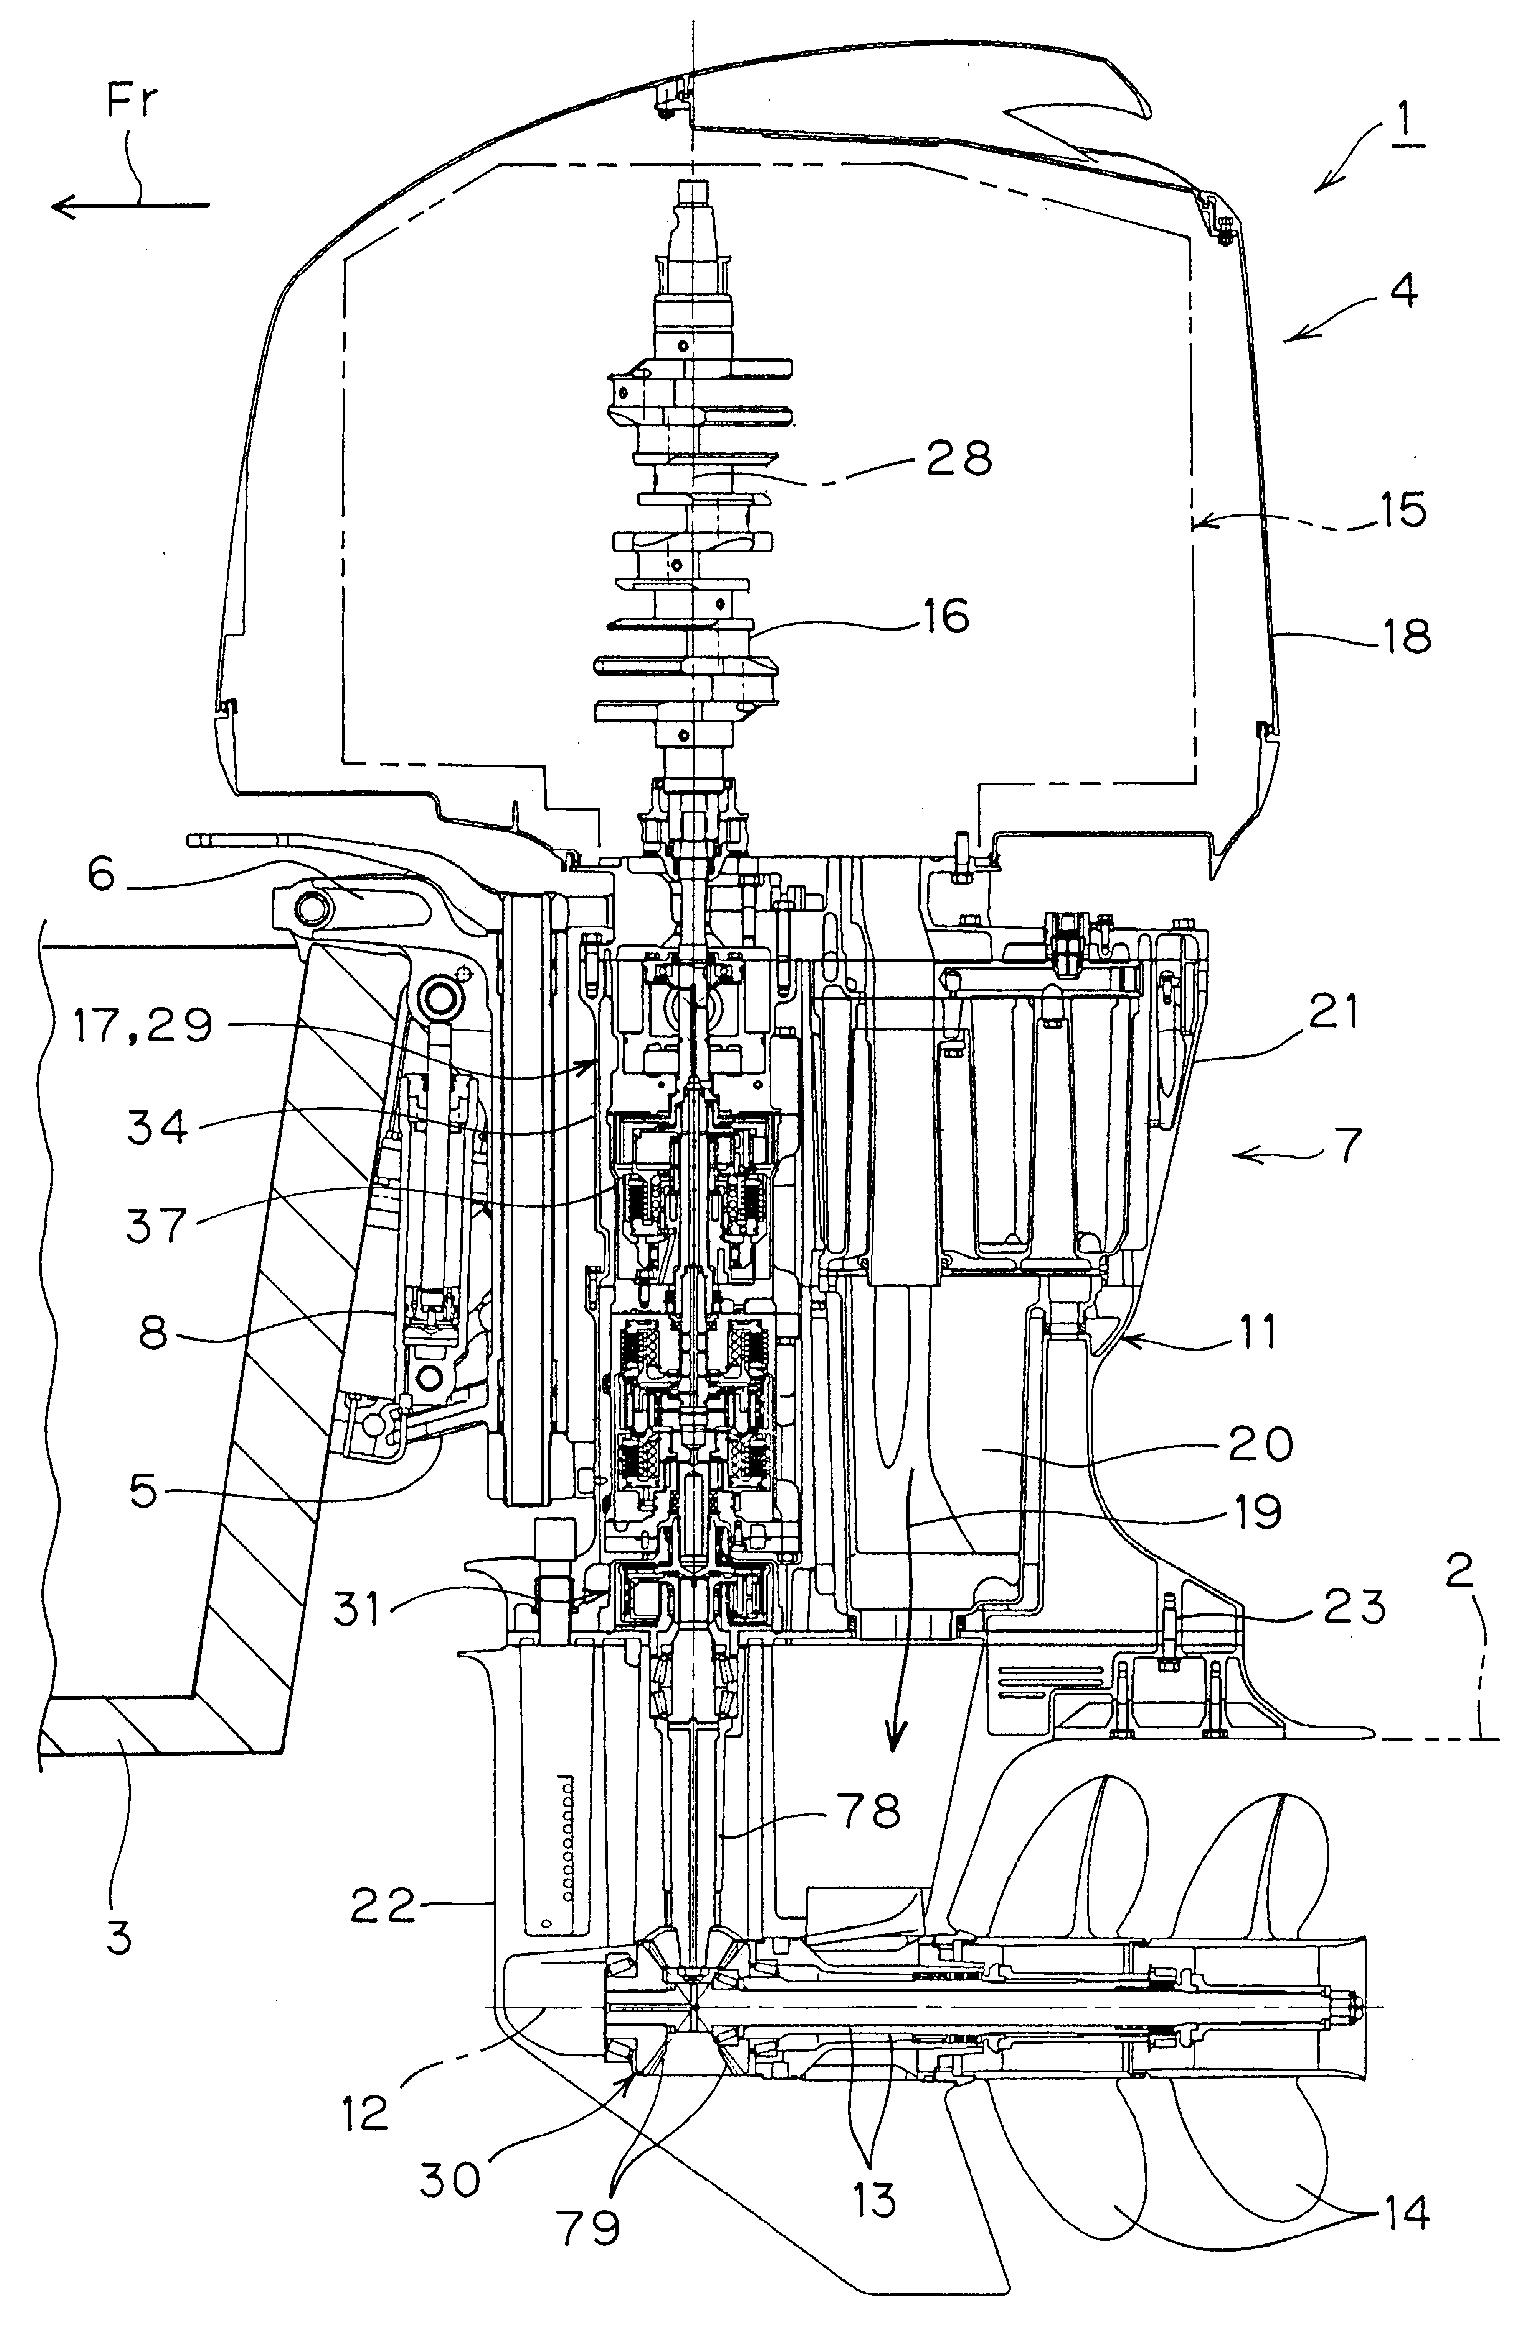 Water cooling apparatus in power transmission system of boat propulsion unit